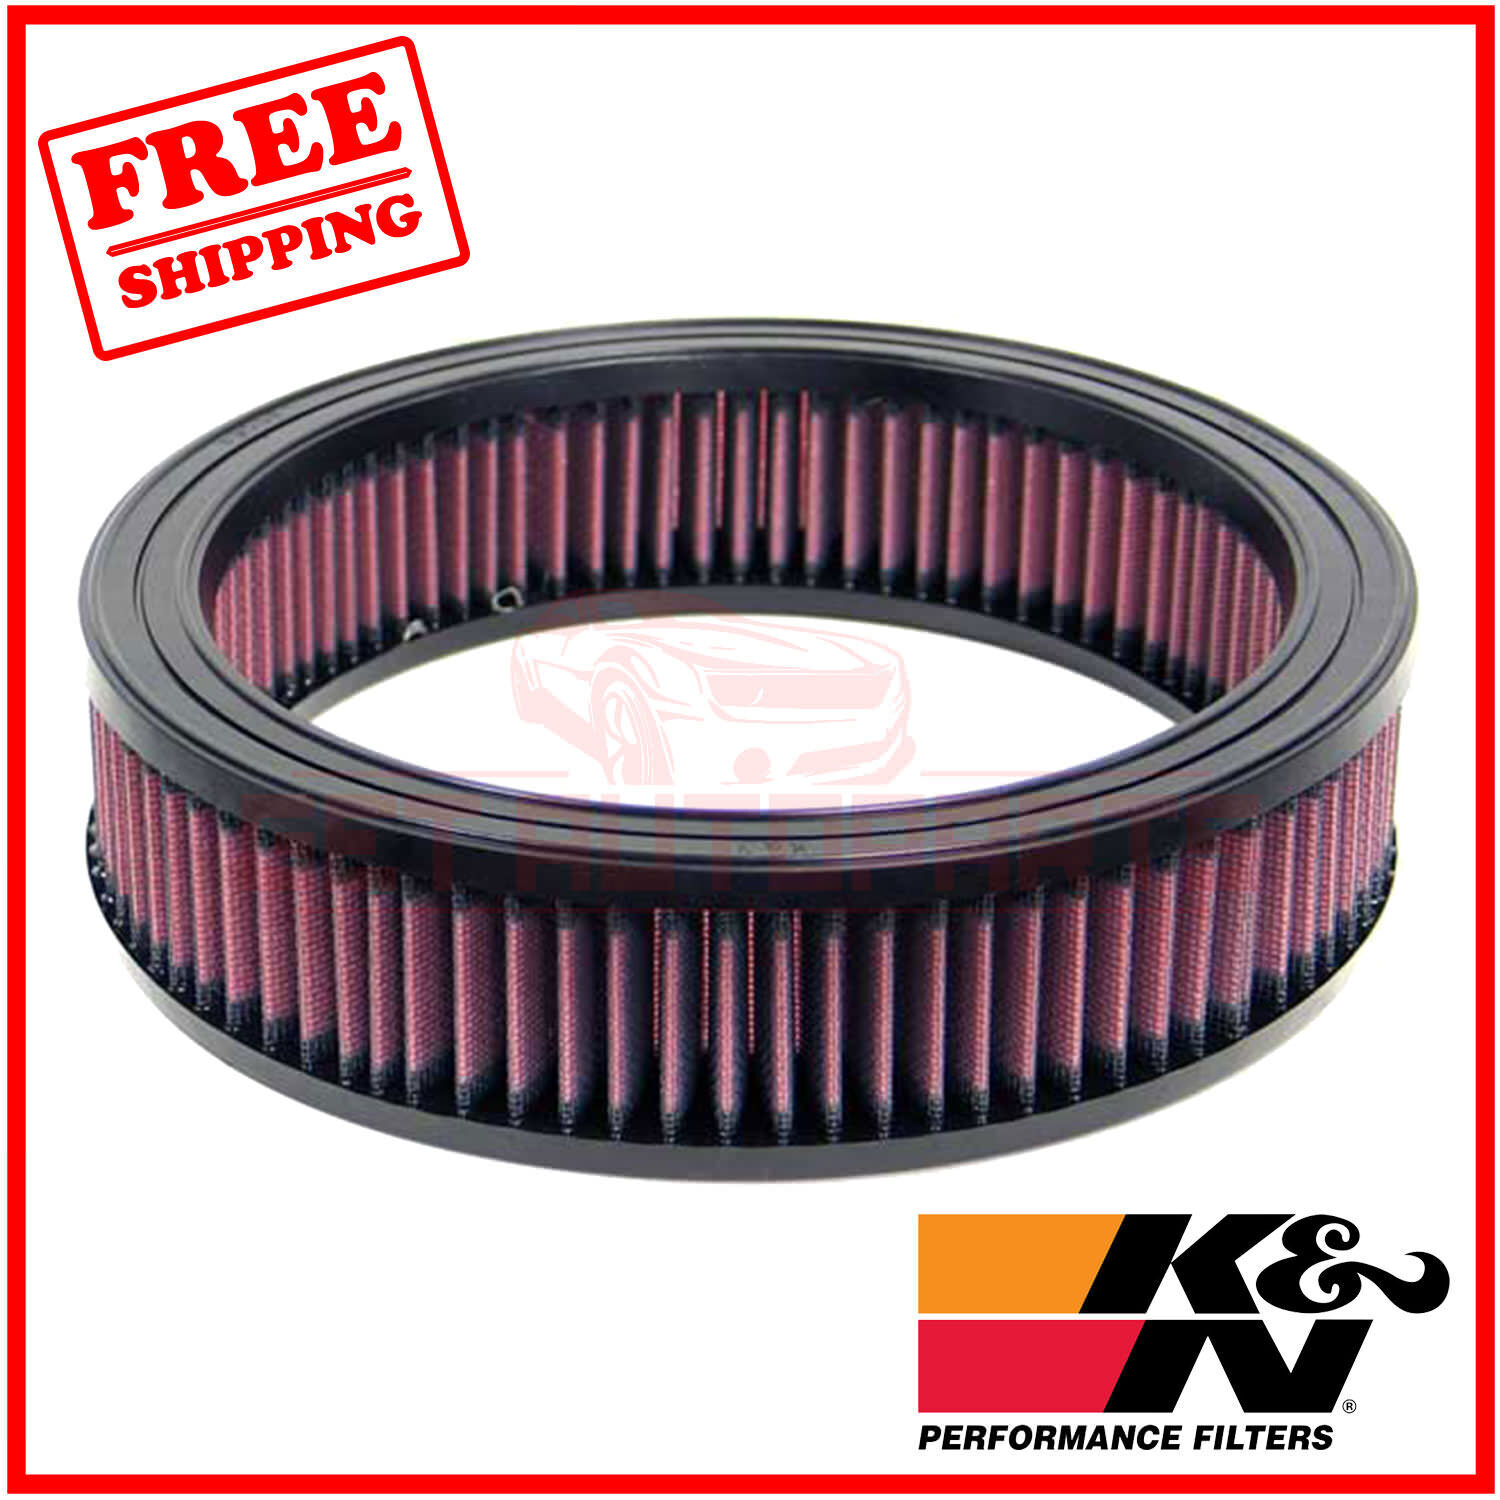 K&N Replacement Air Filter fits Ford Fairlane 1966-1967